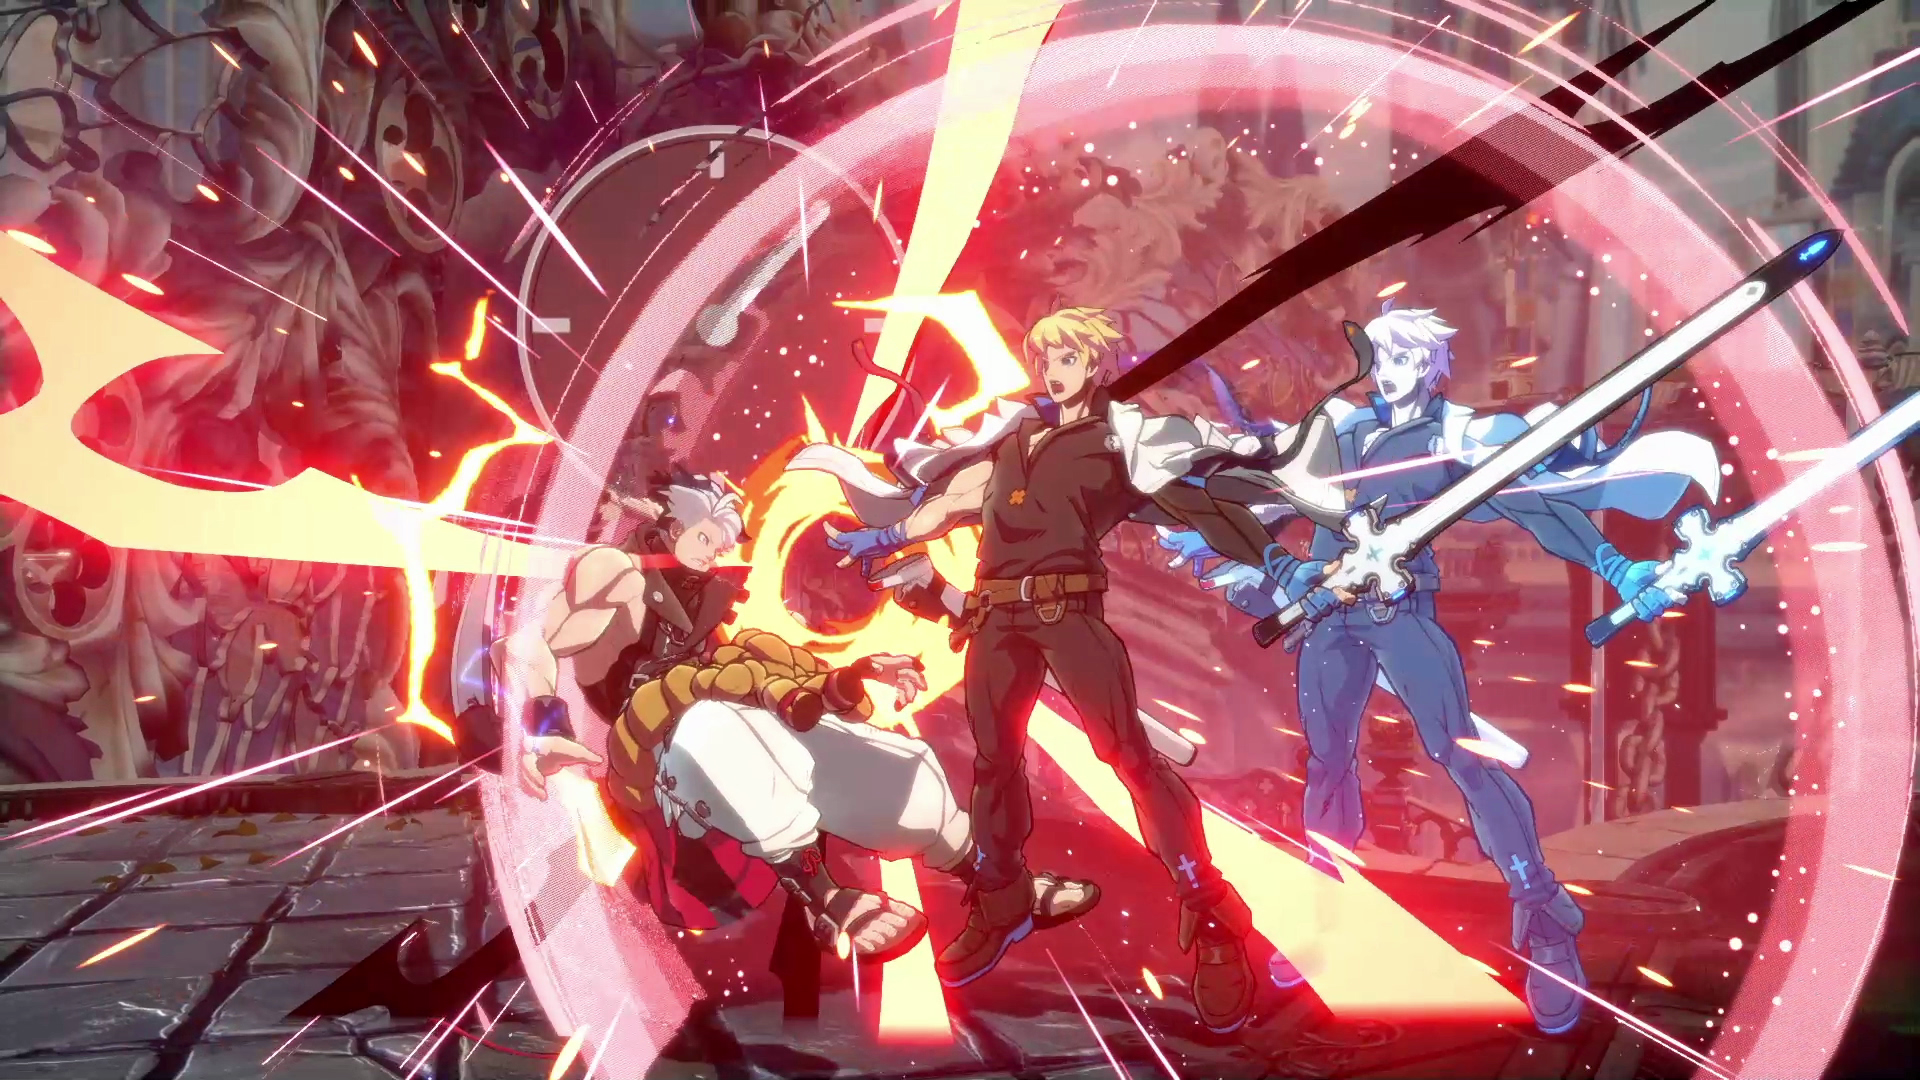 Guilty Gear: Strive showcases its game modes in latest trailer